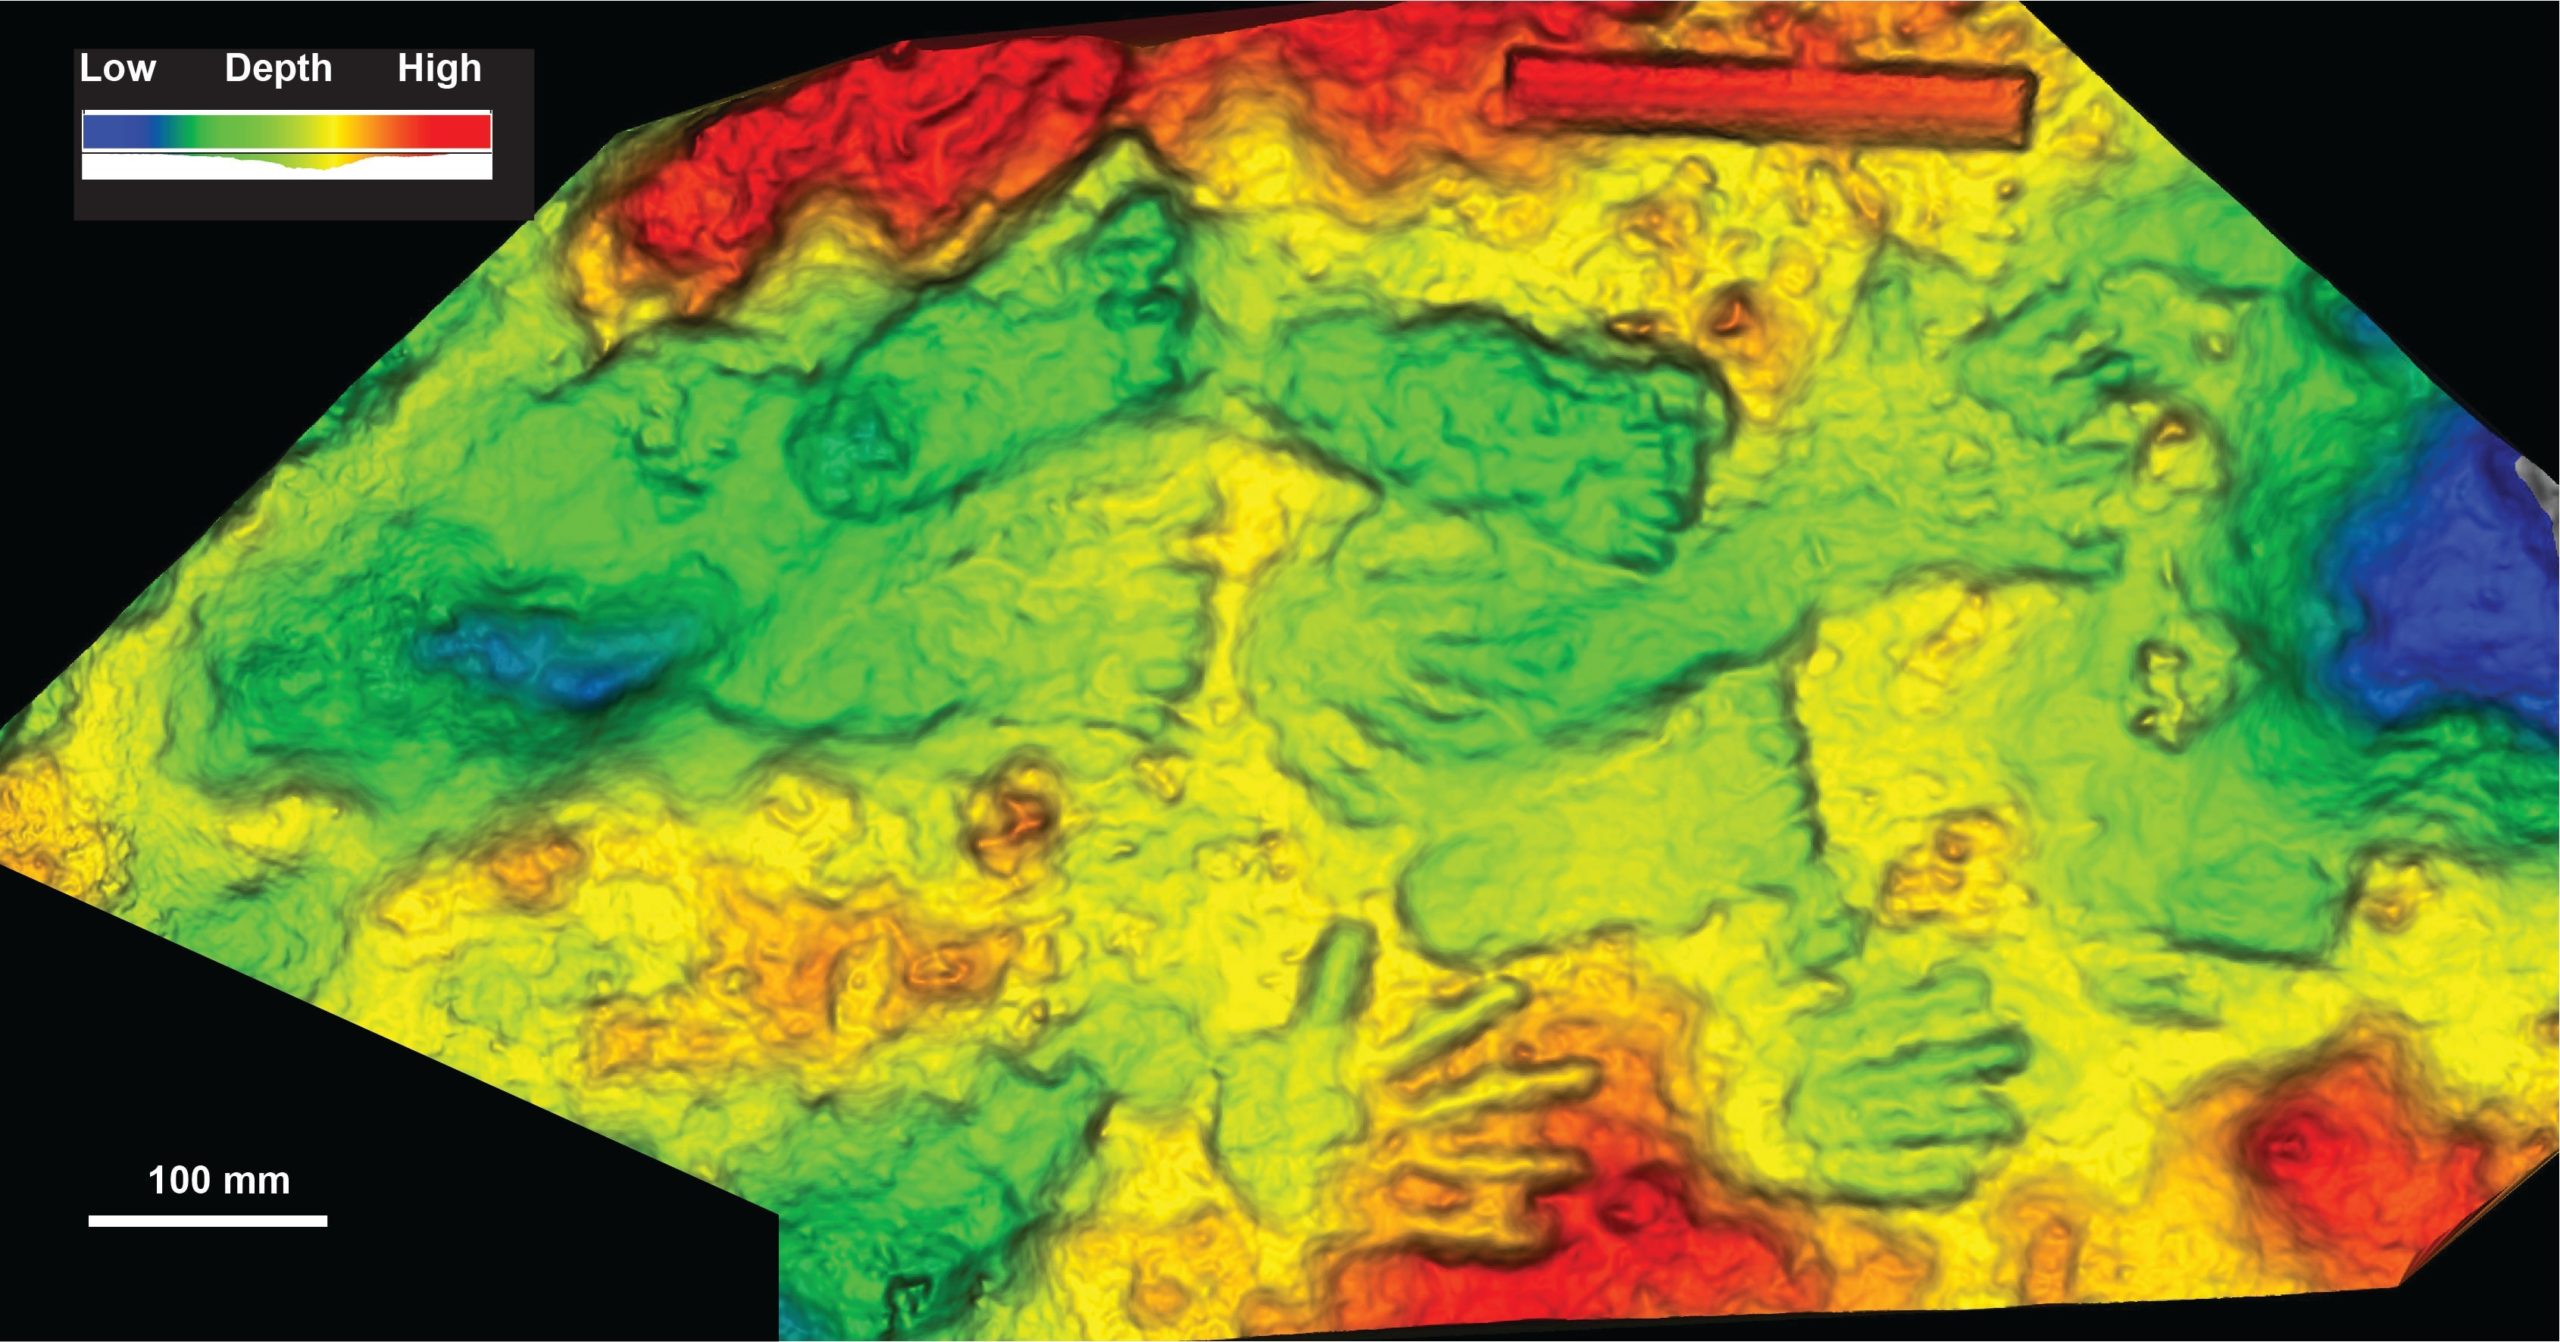 A 3D-scan of the print panel from Quesang, with different colours reflecting different depths. (Photo: D.D. Zhang et al. / Science Bulletin)